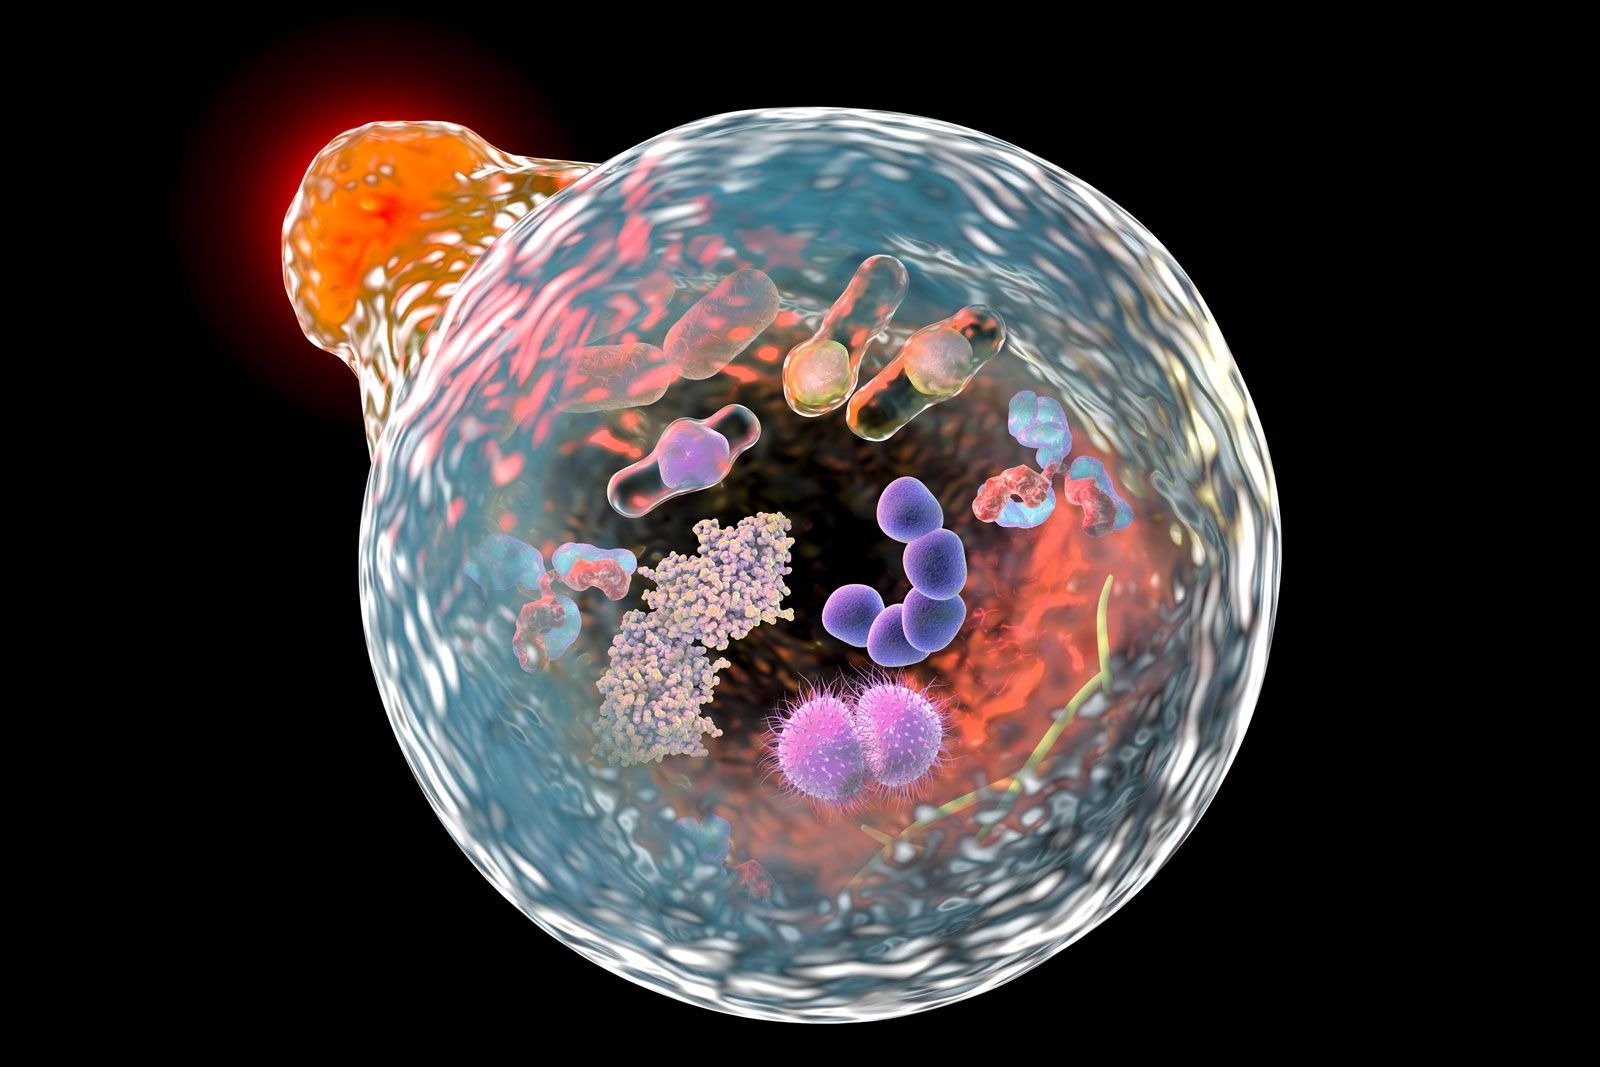 Why Are Lysosomes Important To The Health Of Cells?